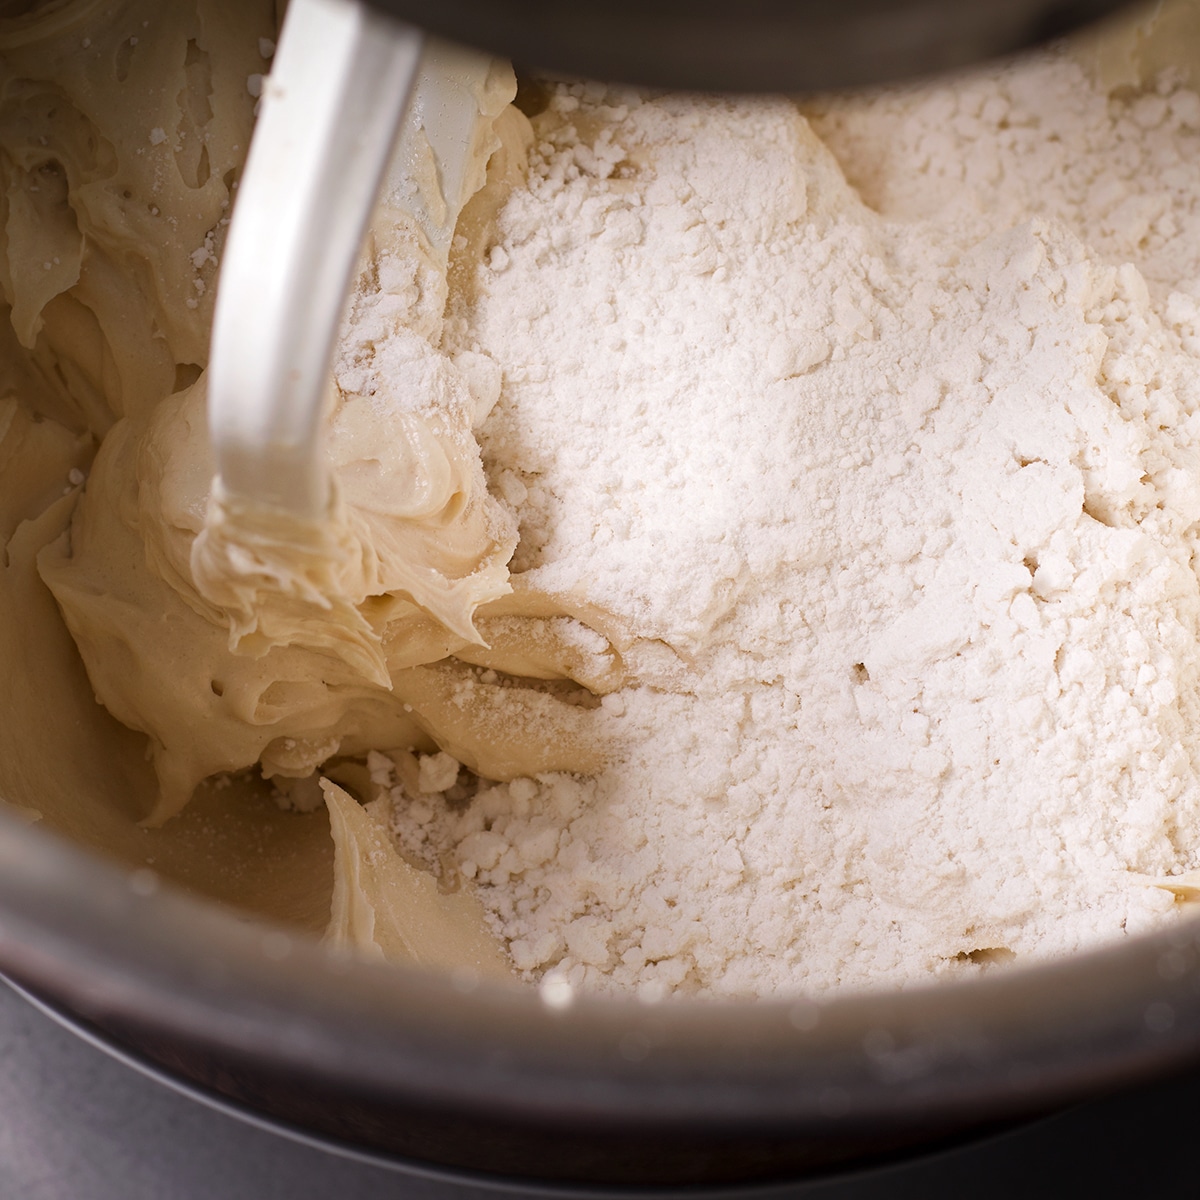 Gently mixing cake flour into the batter.